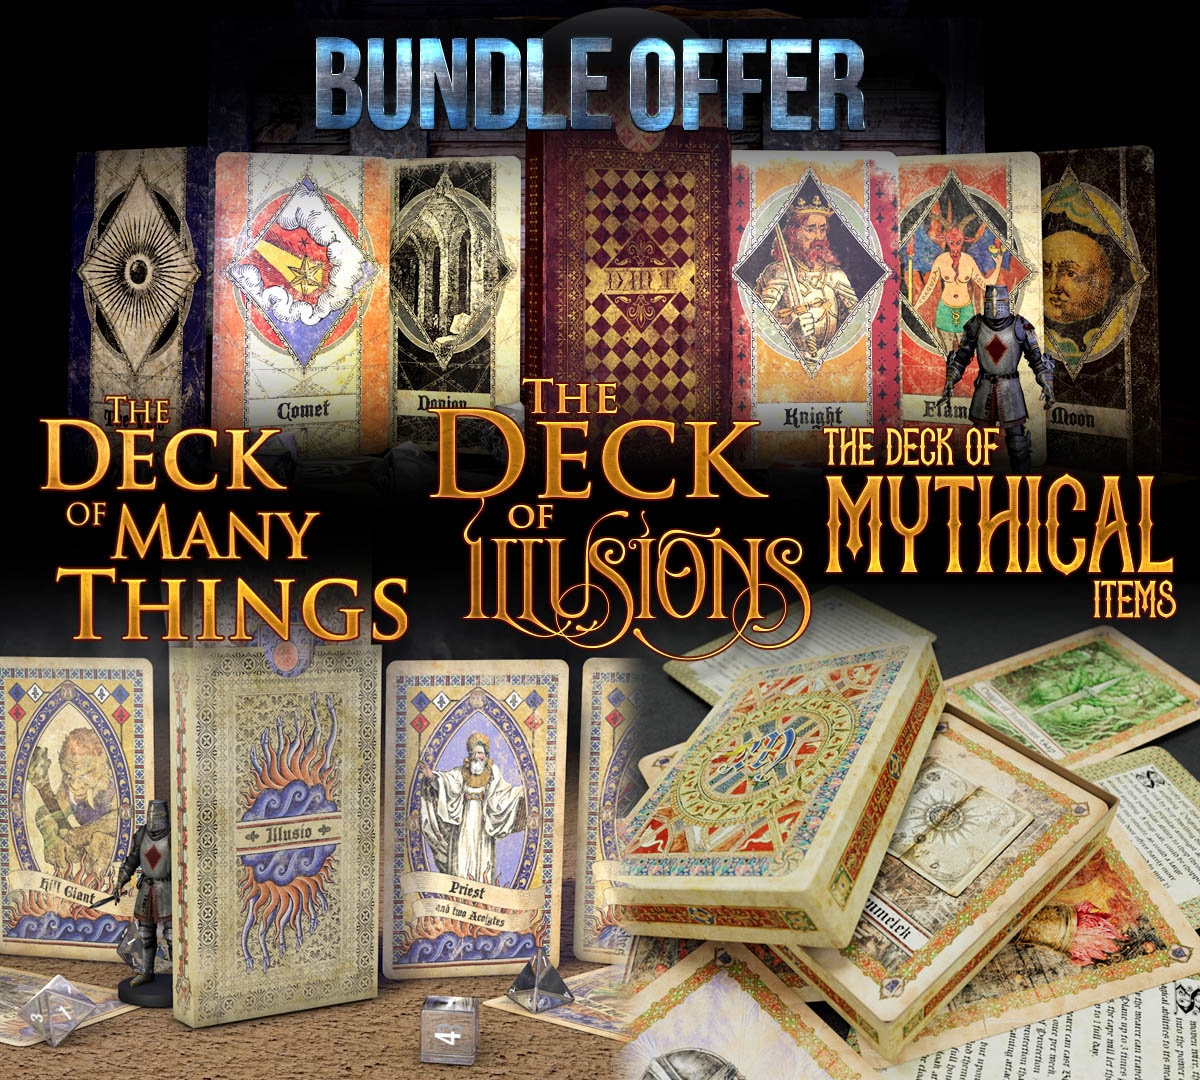 Deck of Many Things / Deck of Illusion / Deck Mythical Items Bundle Offer.  